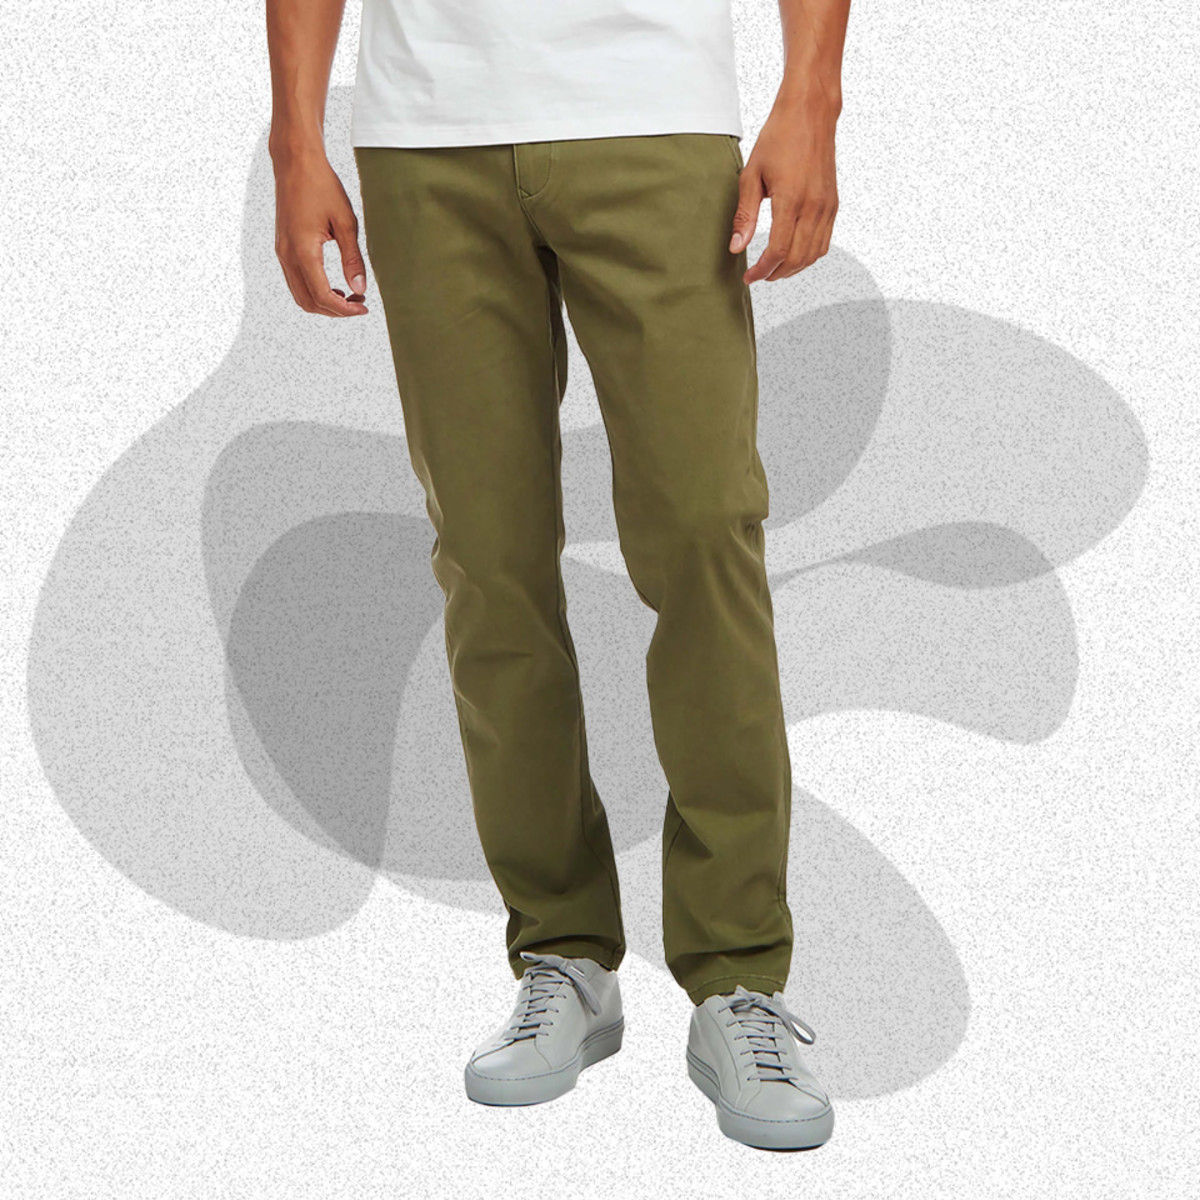 Khakis: A Man's Guide to Fit and Style